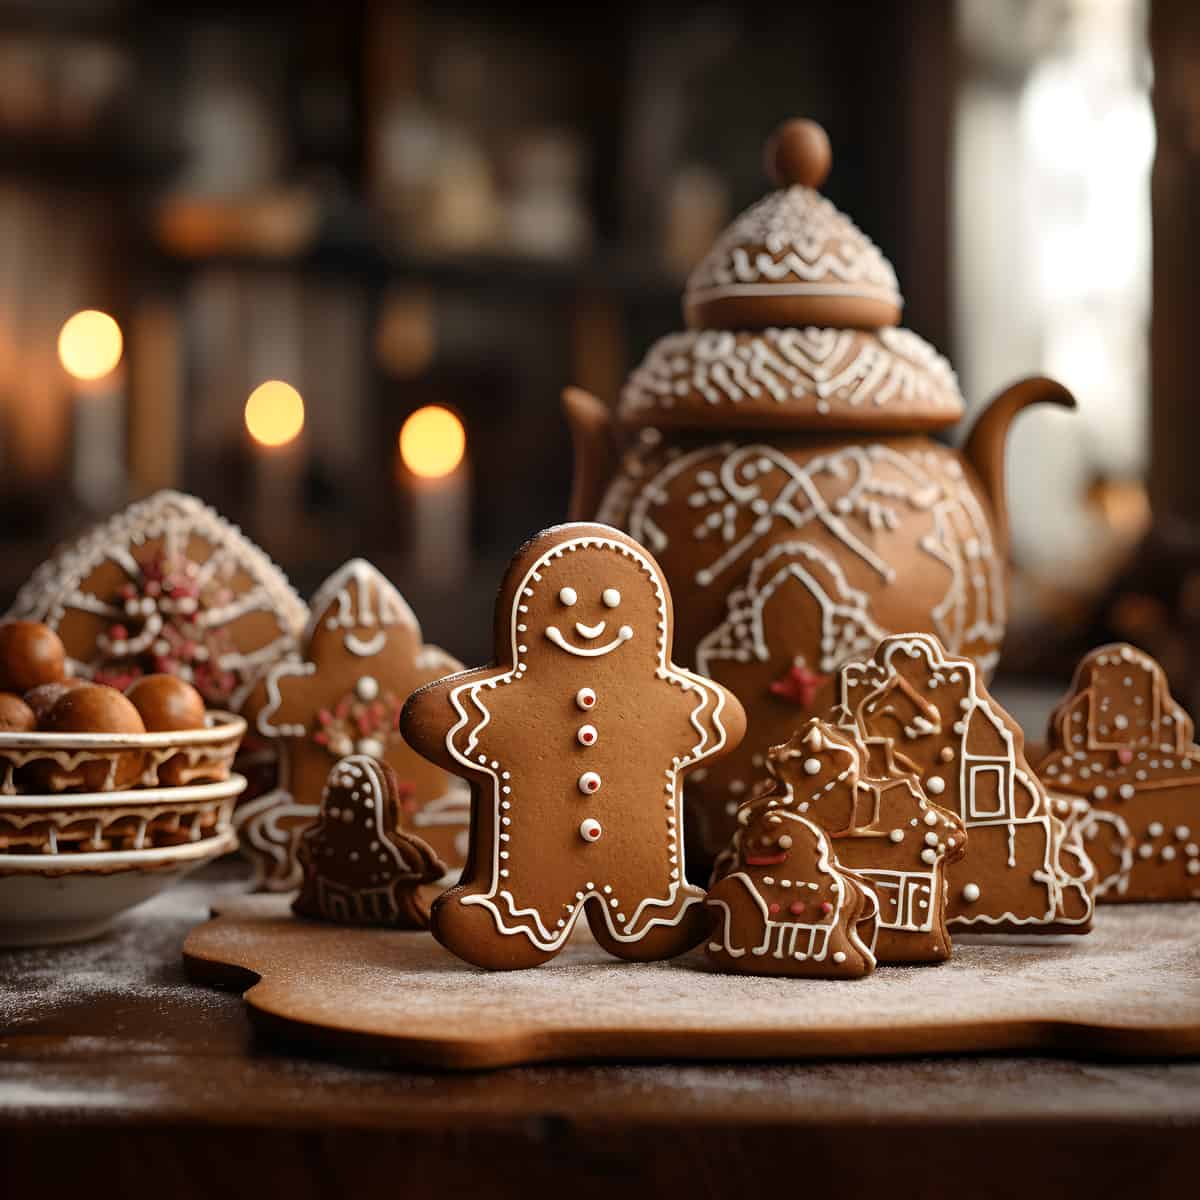 Gingerbread on a kitchen counter